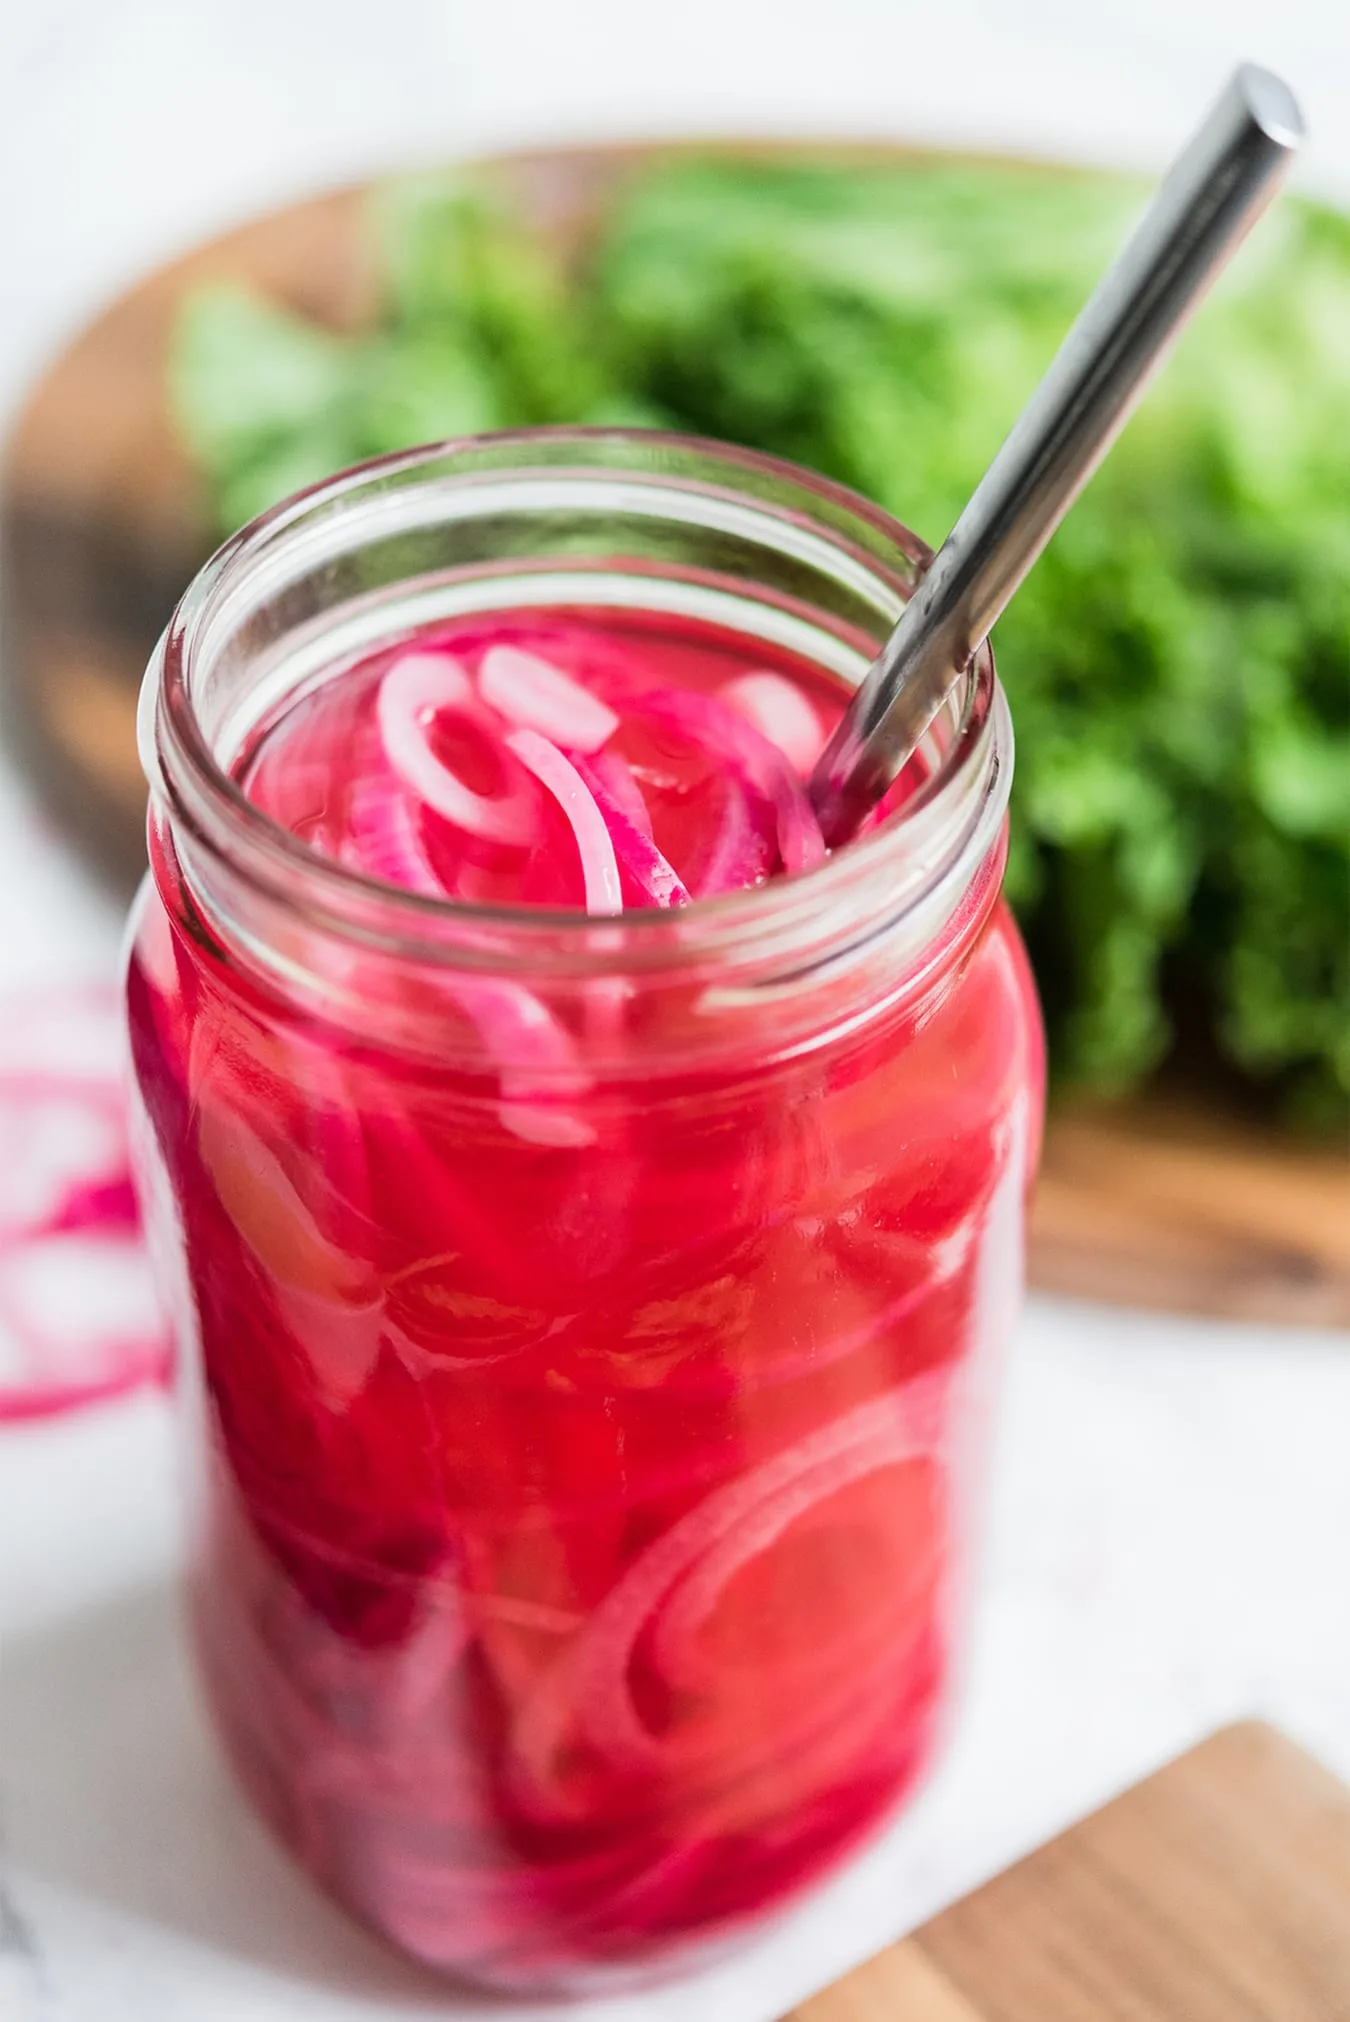 https://thesweetestoccasion.com/wp-content/uploads/2018/07/party-ideas-pickled-red-onions-recipe-2.jpg.webp